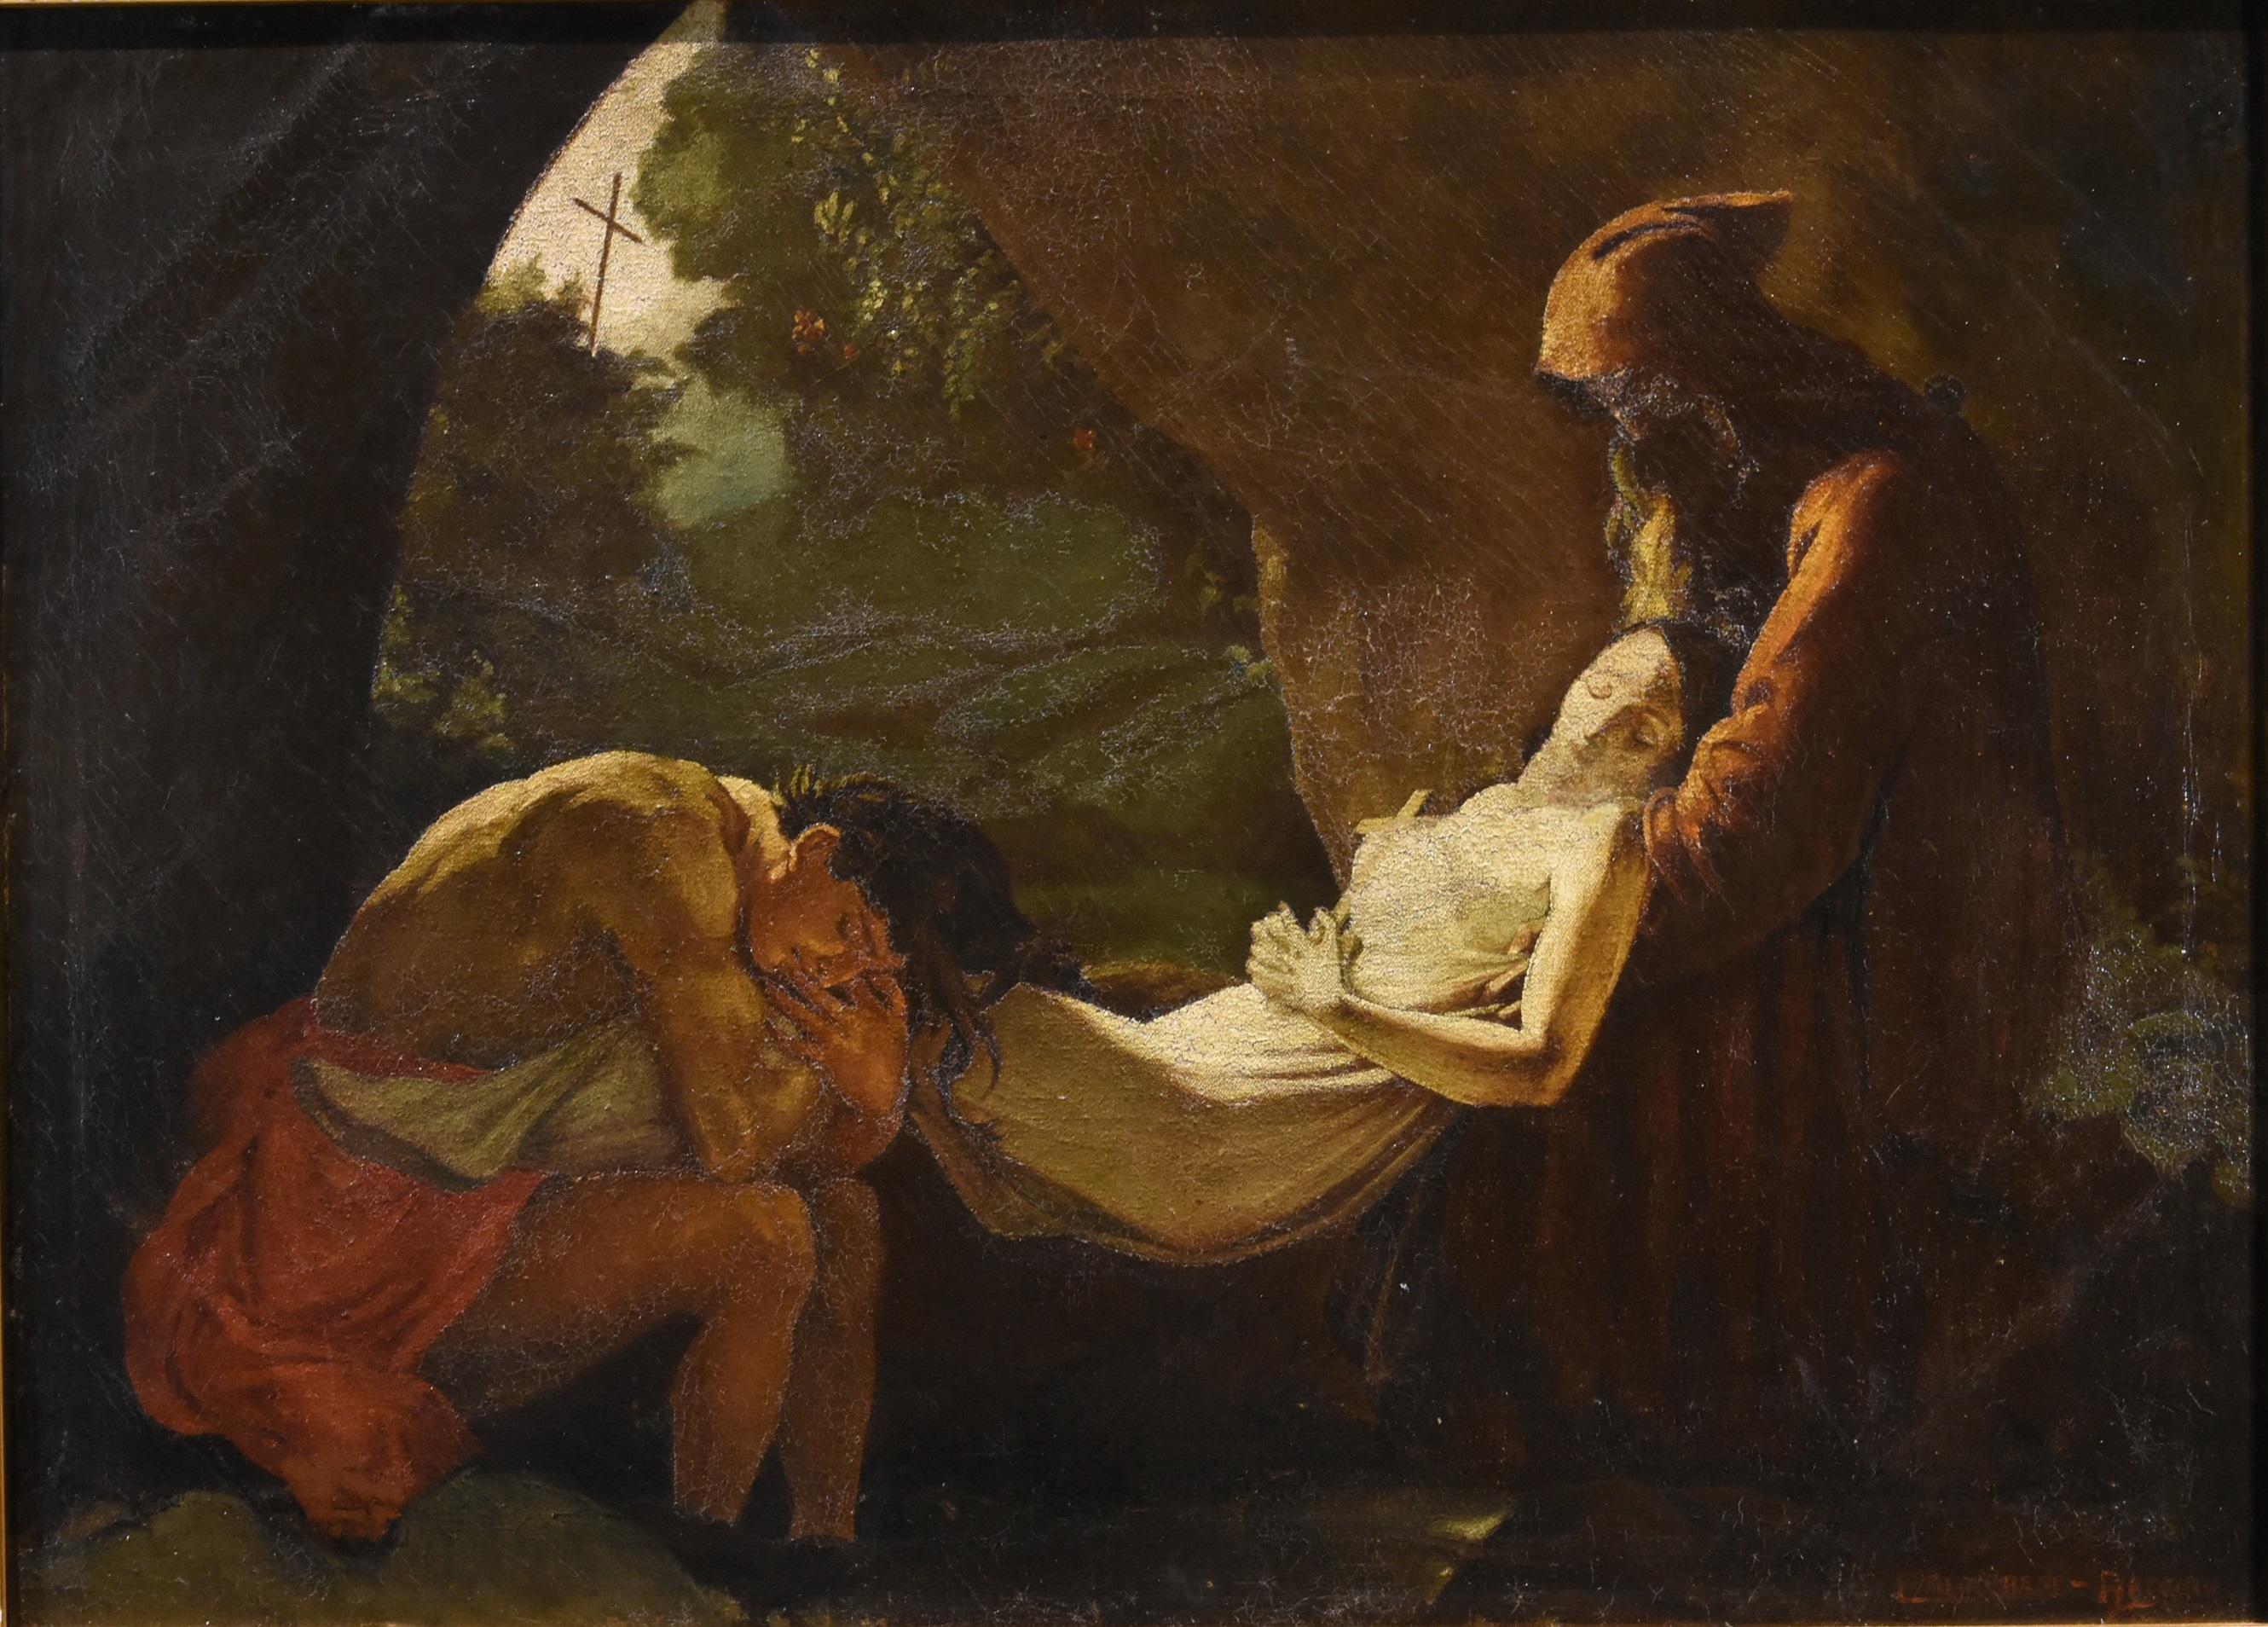 Deposition Atala De Roussy-trioson Paint Oil on canvas 19/20th Century French  - Old Masters Painting by Unknown